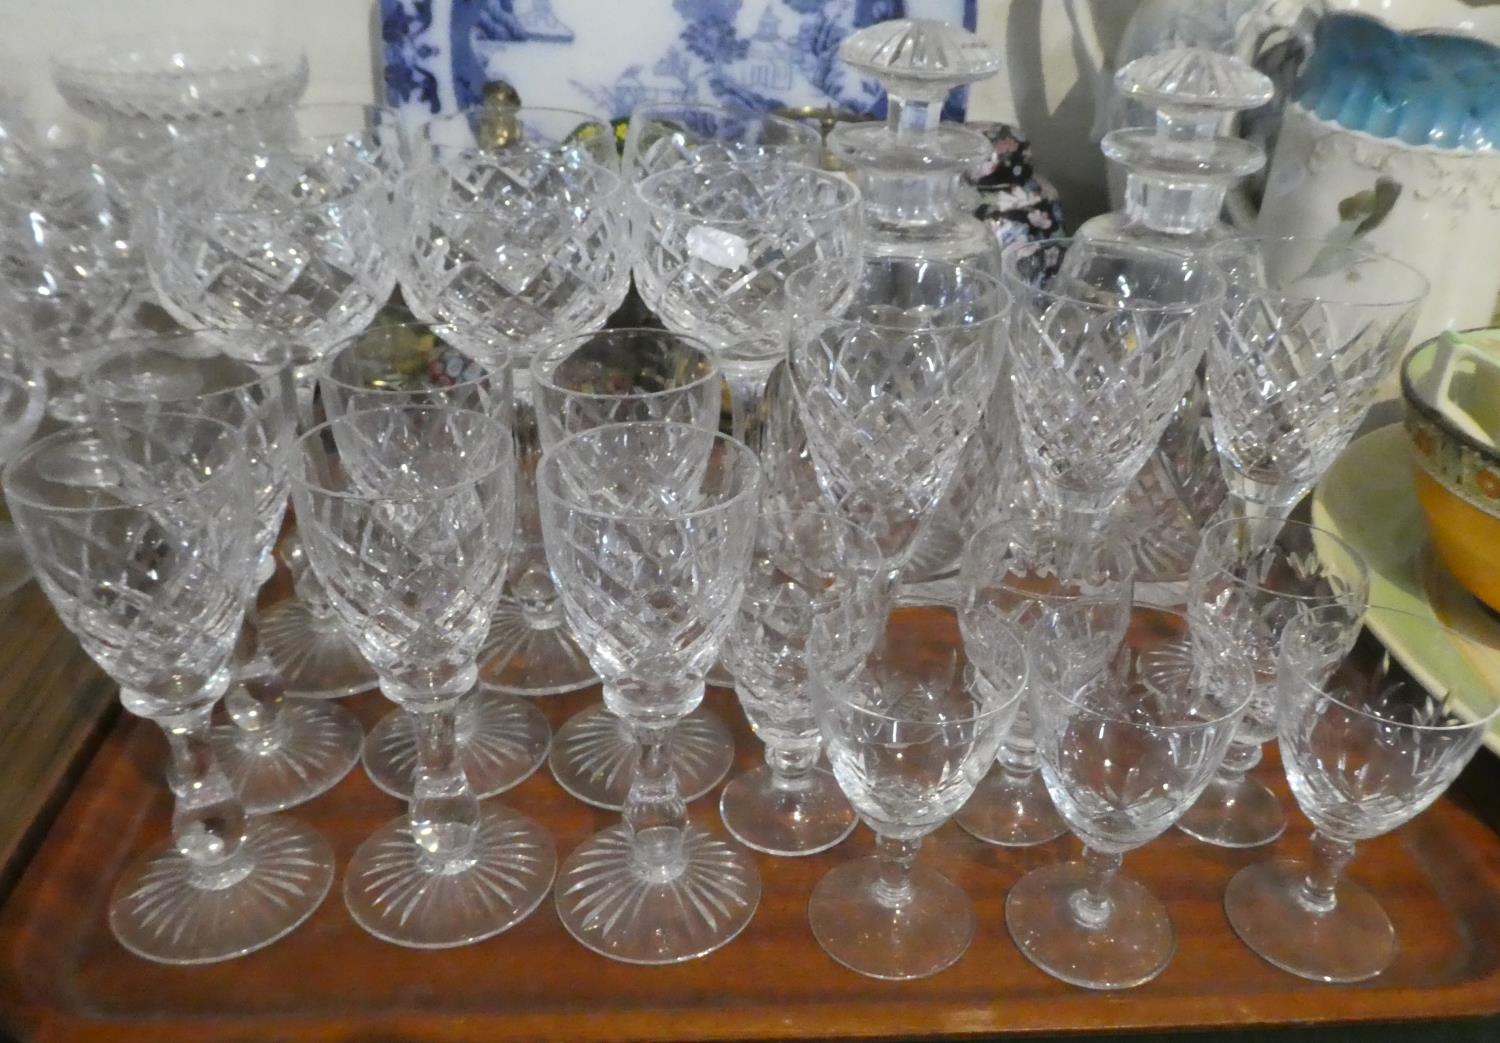 A Tray Containing Various Cut Glass Wines, Sherries, Ports, Pair of Decanters etc